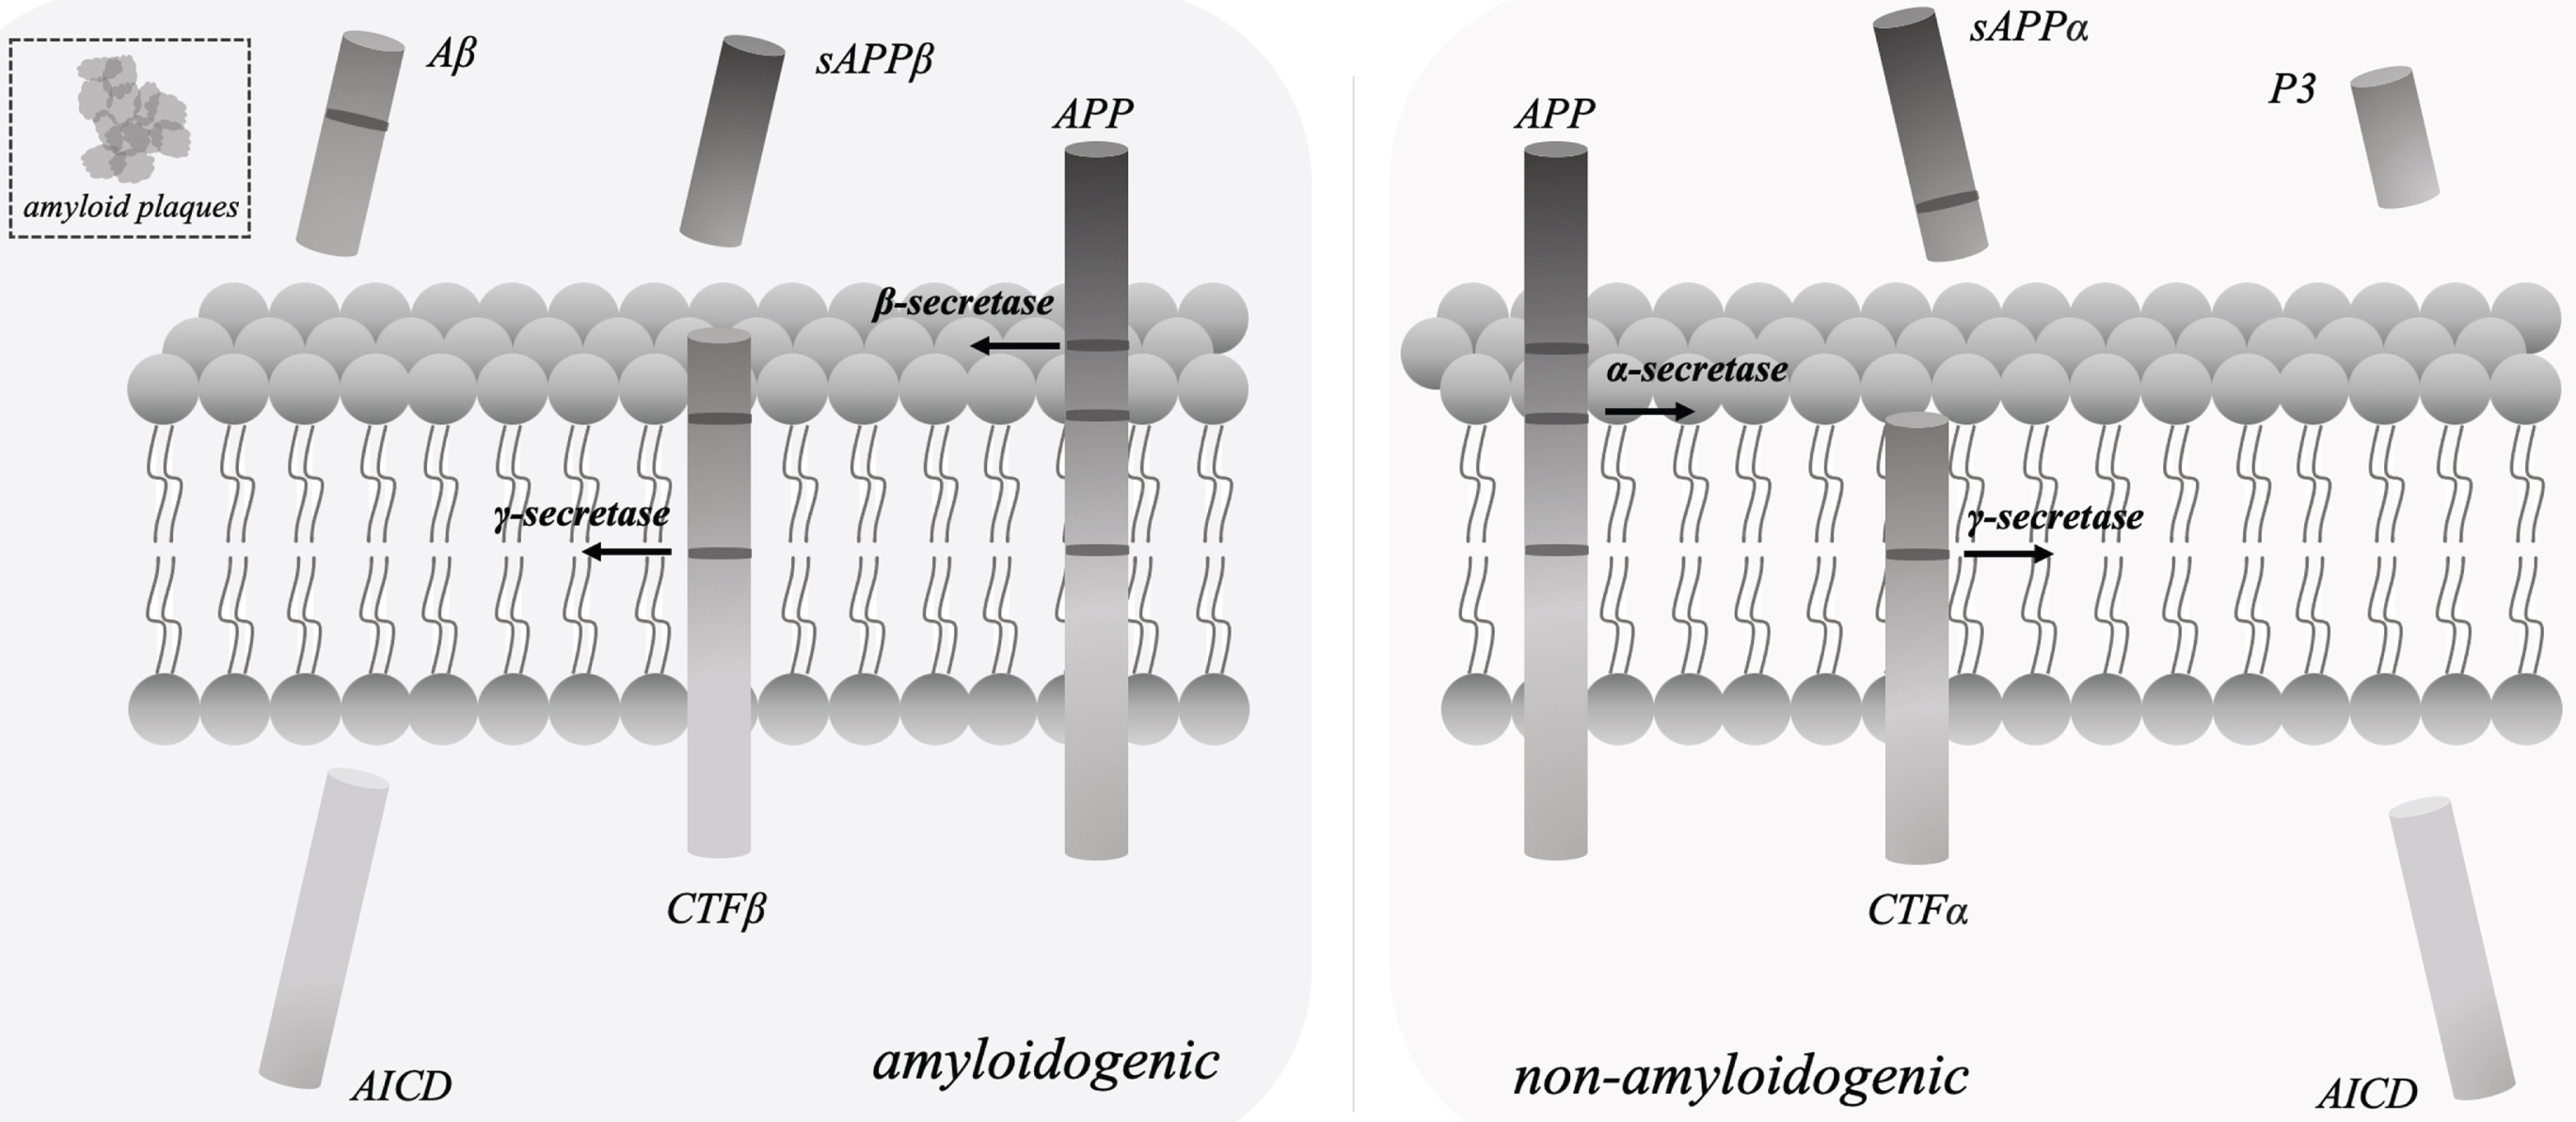 In line with the amyloid-cascade theory of Aβ production, sAβPPβ, Aβ peptides, and the intracellular domain of AβPP (AICD) were released from AβPP by β-secretase and γ-secretase cleavage, respectively. The essential components of γ-secretase include nicastrin, PSEN 1, PEN 2 and APH 1. In the non-amyloidogenic pathway, sAβPPα, P3 peptides, and AICD were produced by α-secretase and γ-secretase cleavage, respectively.